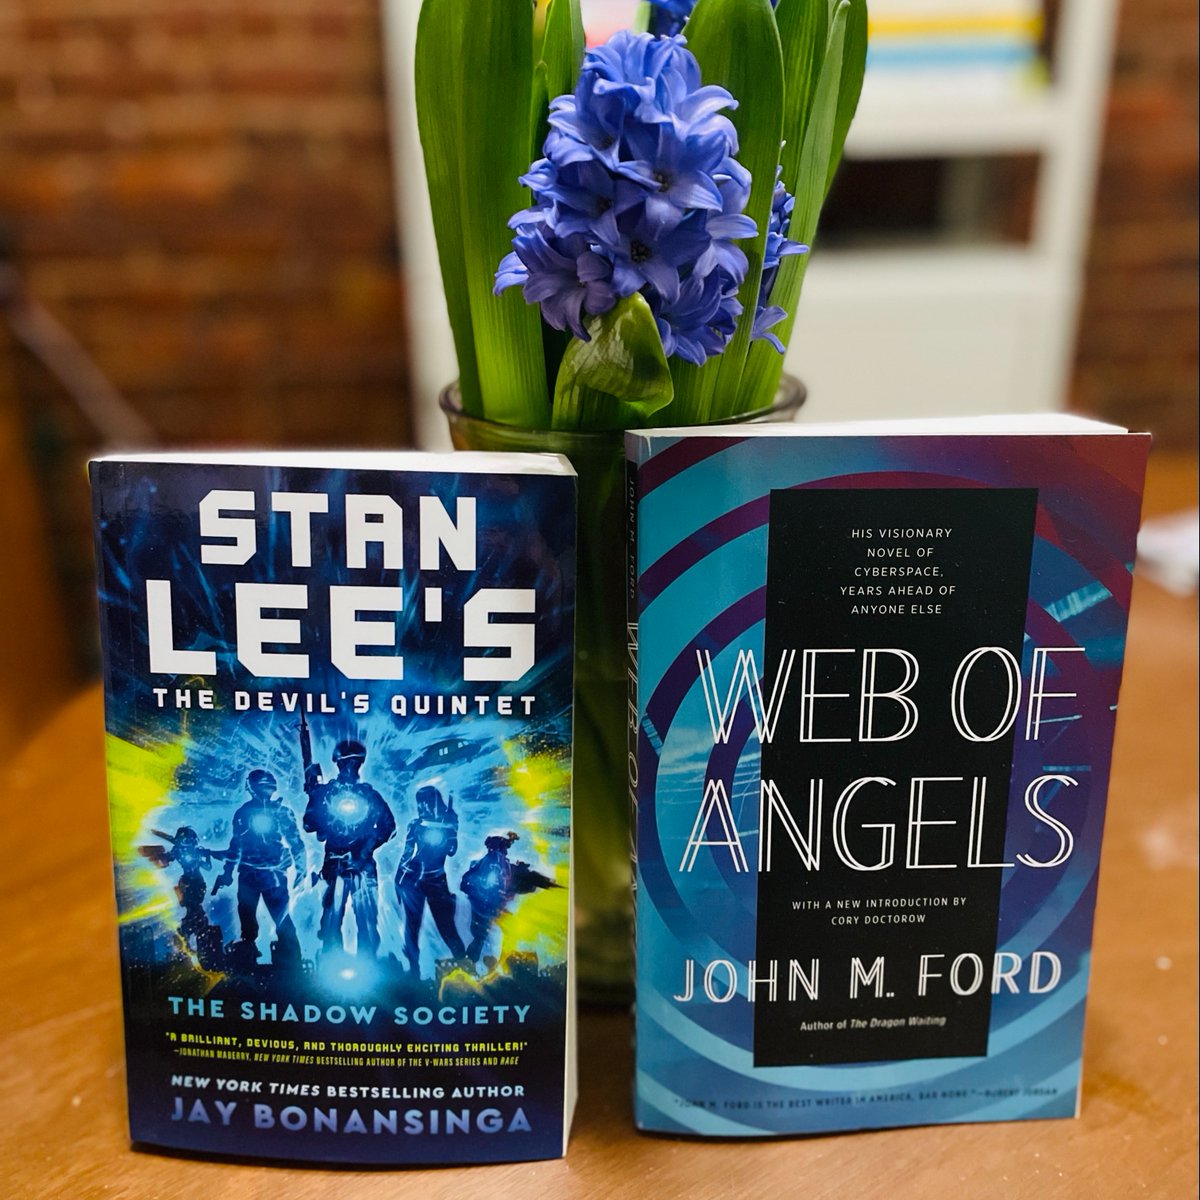 Happy #BookBirthday to @JayBonansinga and @TheRealStanLee's #TheDevilsQuintet: The Shadow Society (now available in paperback) and John M. Ford's #WebofAngels! Scroll below for more info ⬇️